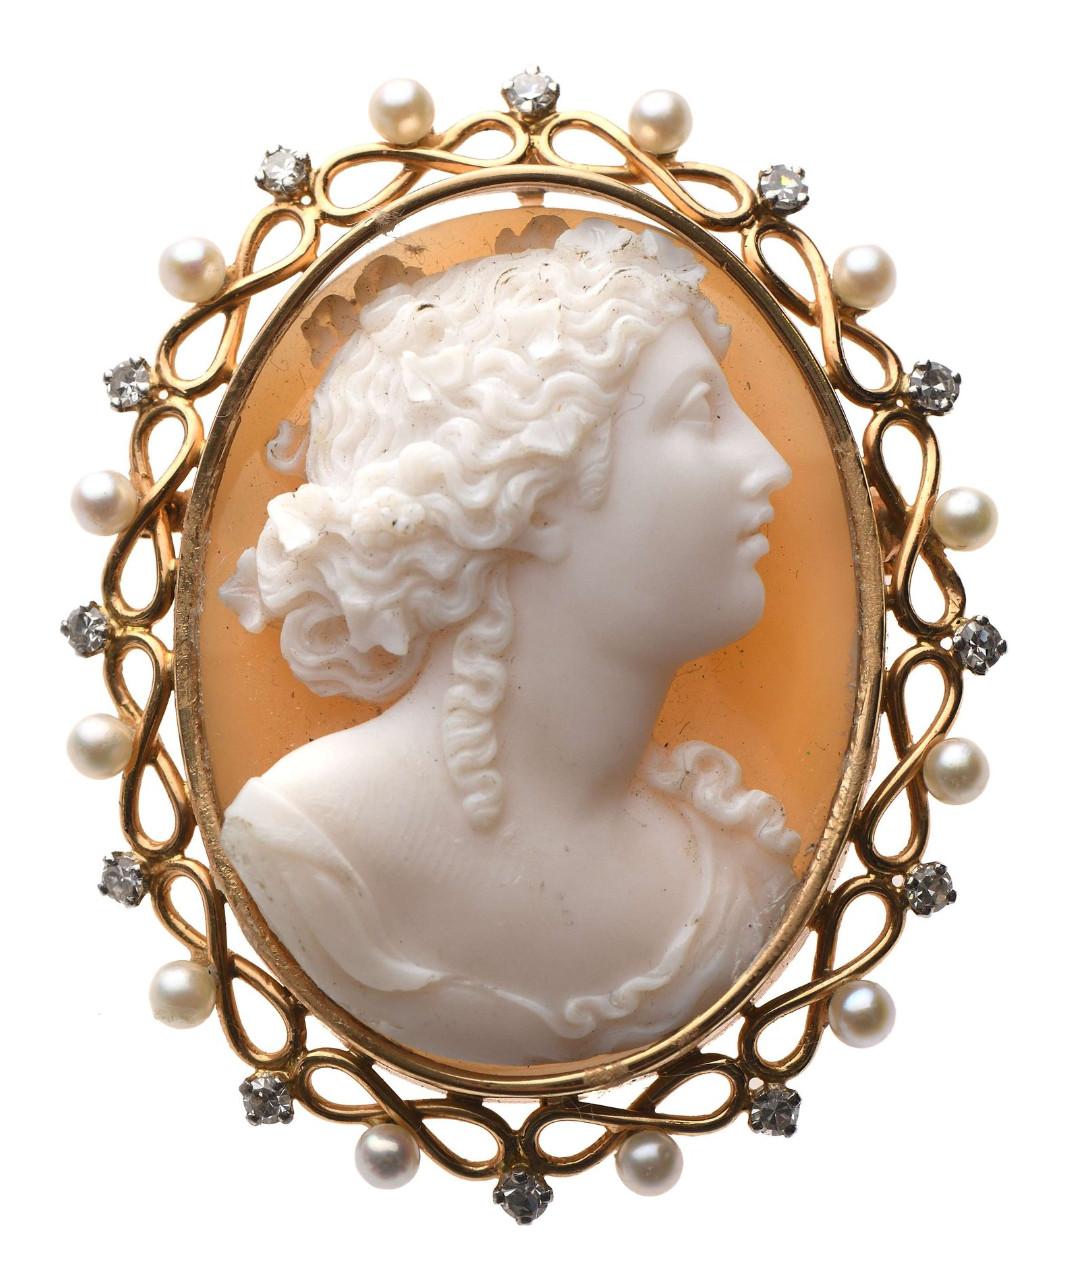 Brooch/pendant  in 18Kt yellow gold adorned with a cameo on agate stylizing a feminine profile in a closed setting, in an entourage of diamonds and pearls on an infinity mesh. French maker's mark trace. Dimensions: 50 x 40 mm - Gross weight: 25.5 g